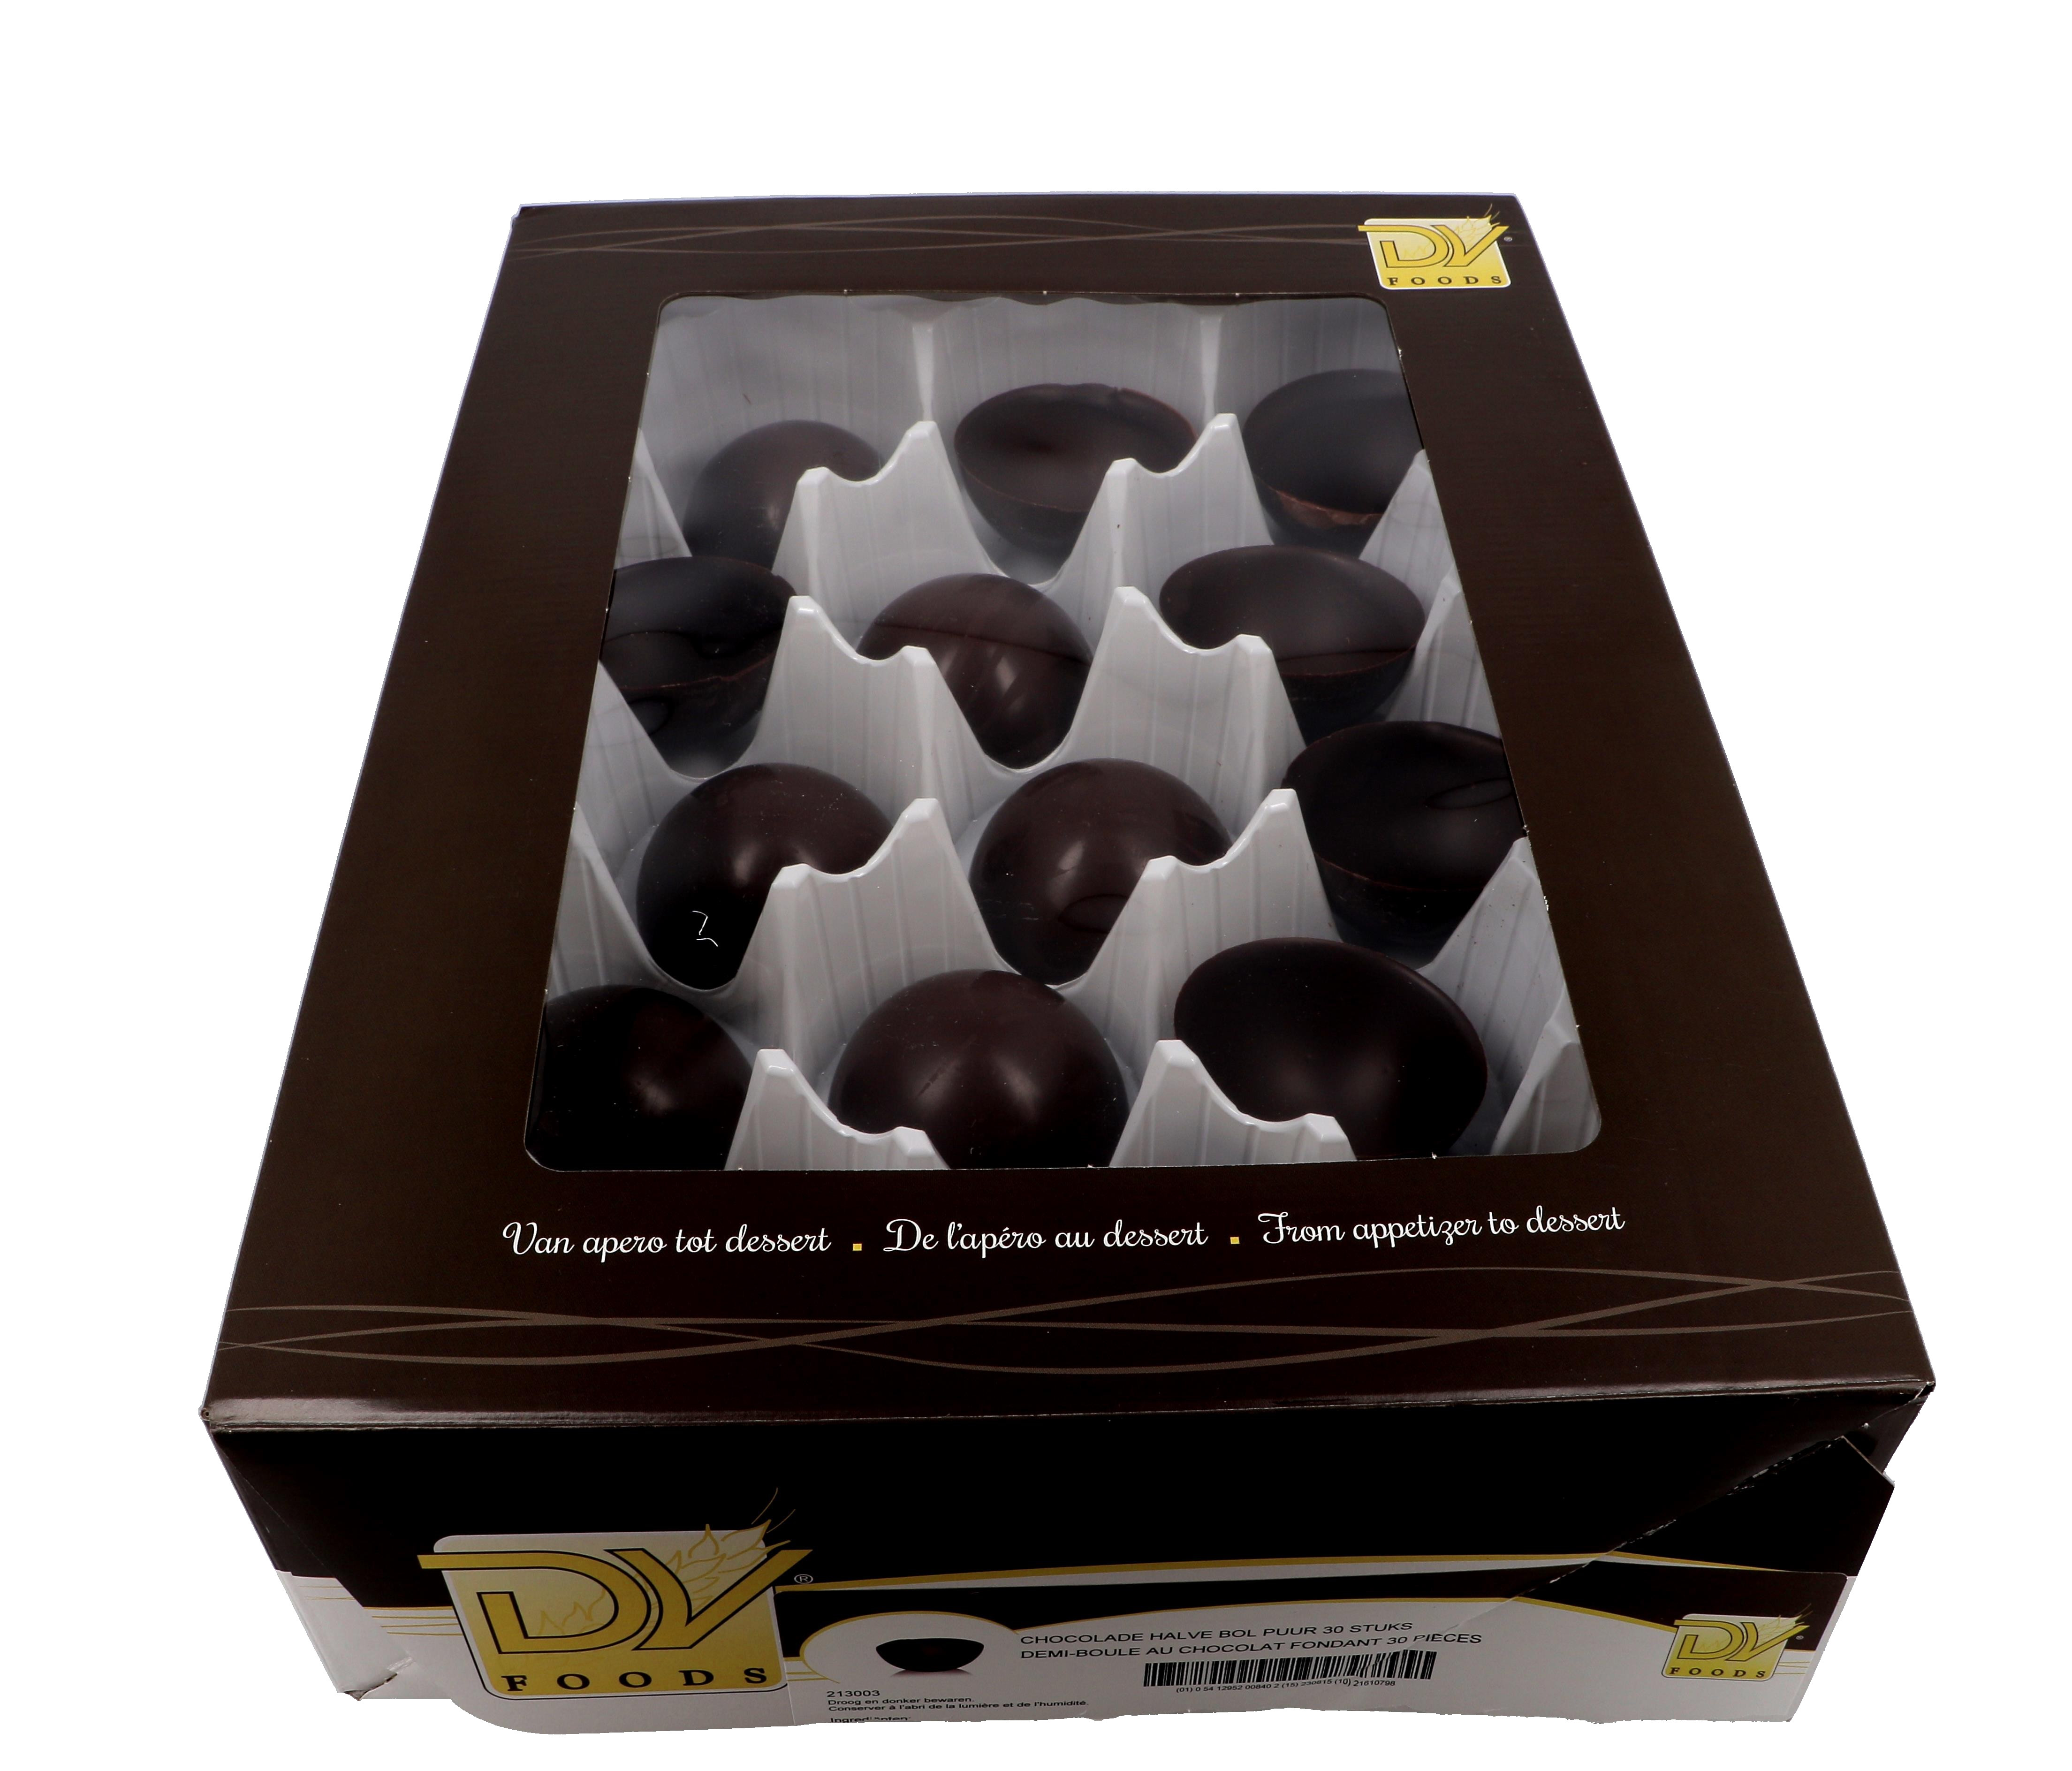 Dome Donkere Chocolade 30st DV Foods